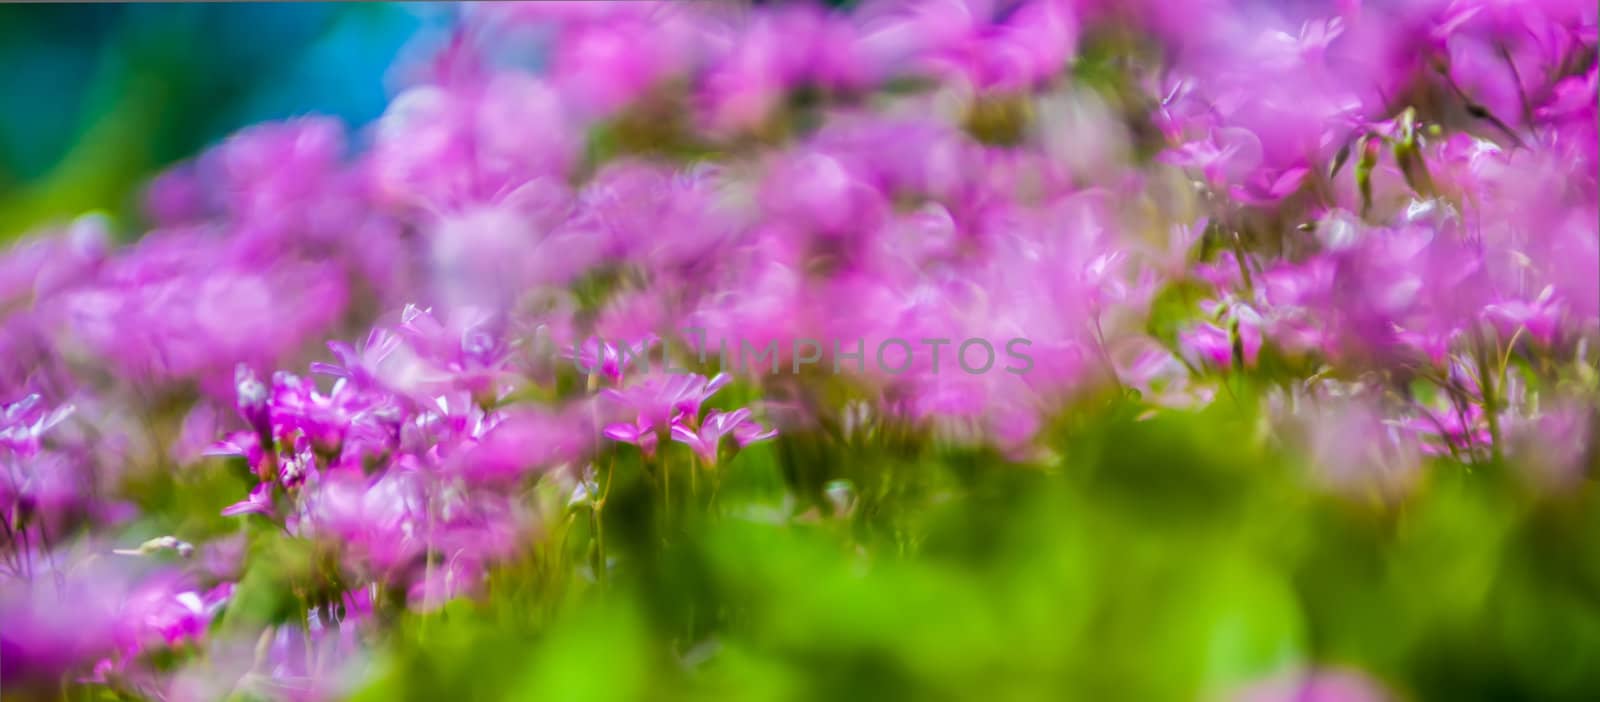 abstract Blurry pink flower background for backgrounds by digidreamgrafix